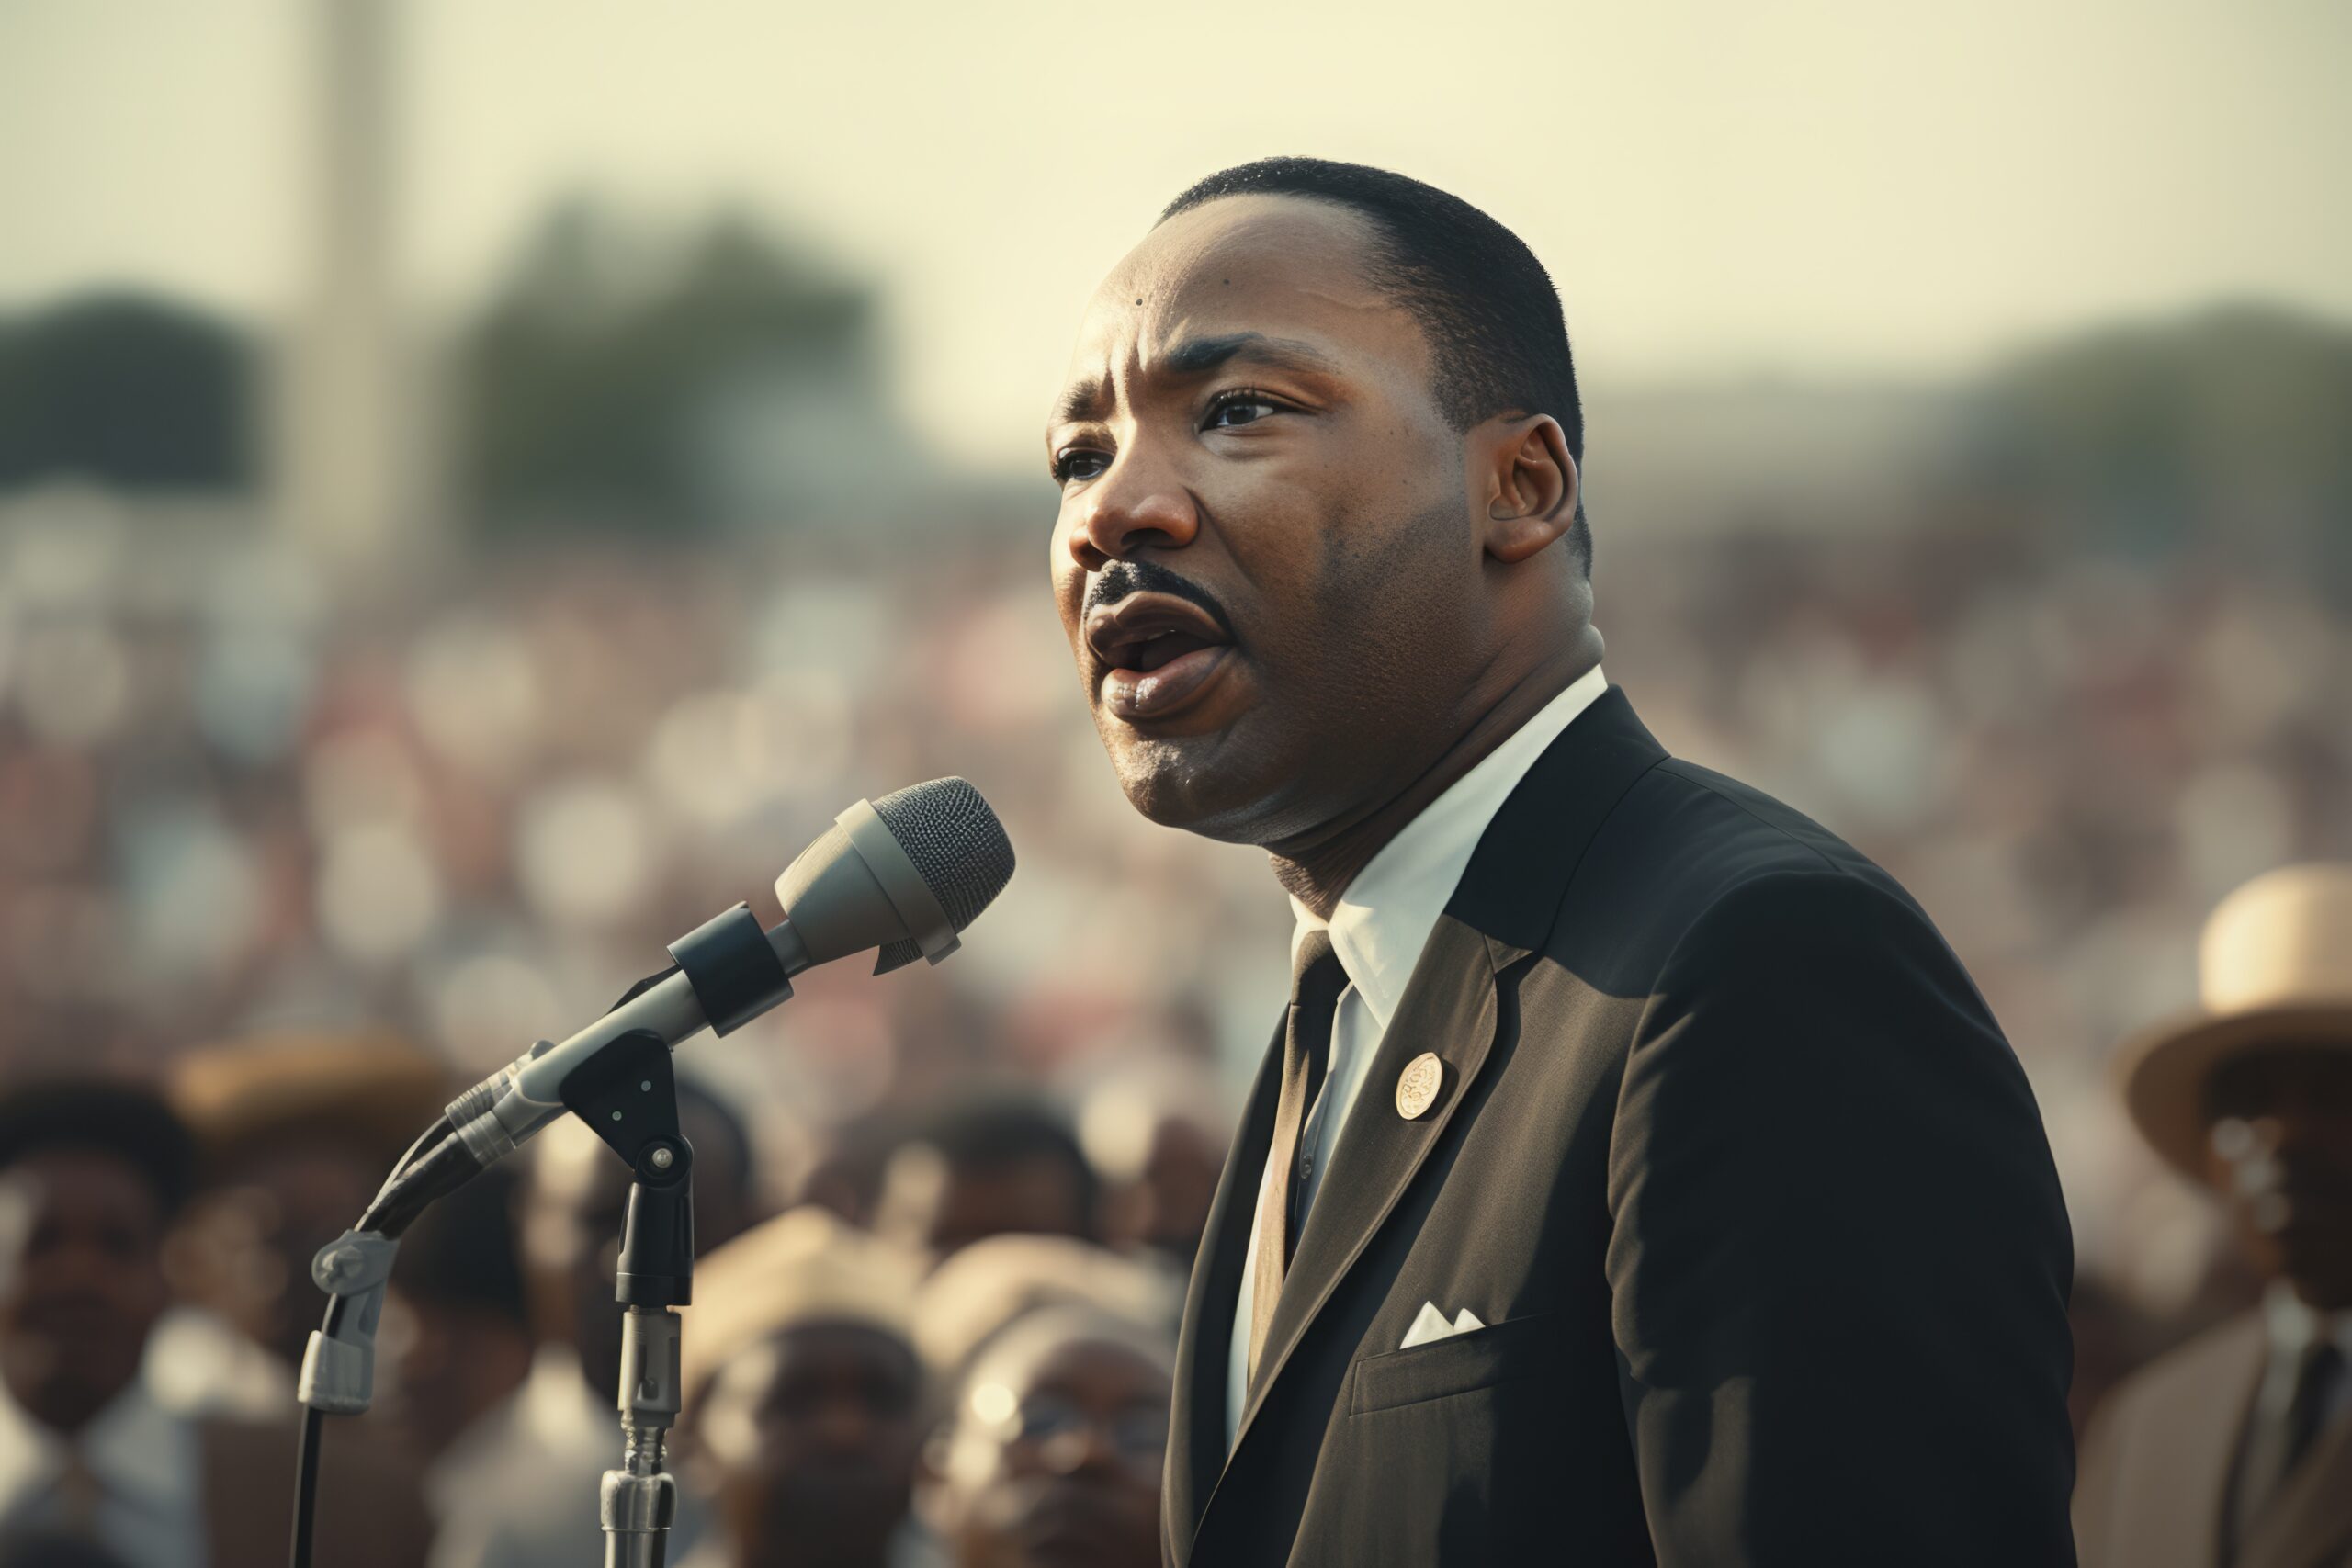 Image of Dr. Martin Luther King at a microphone